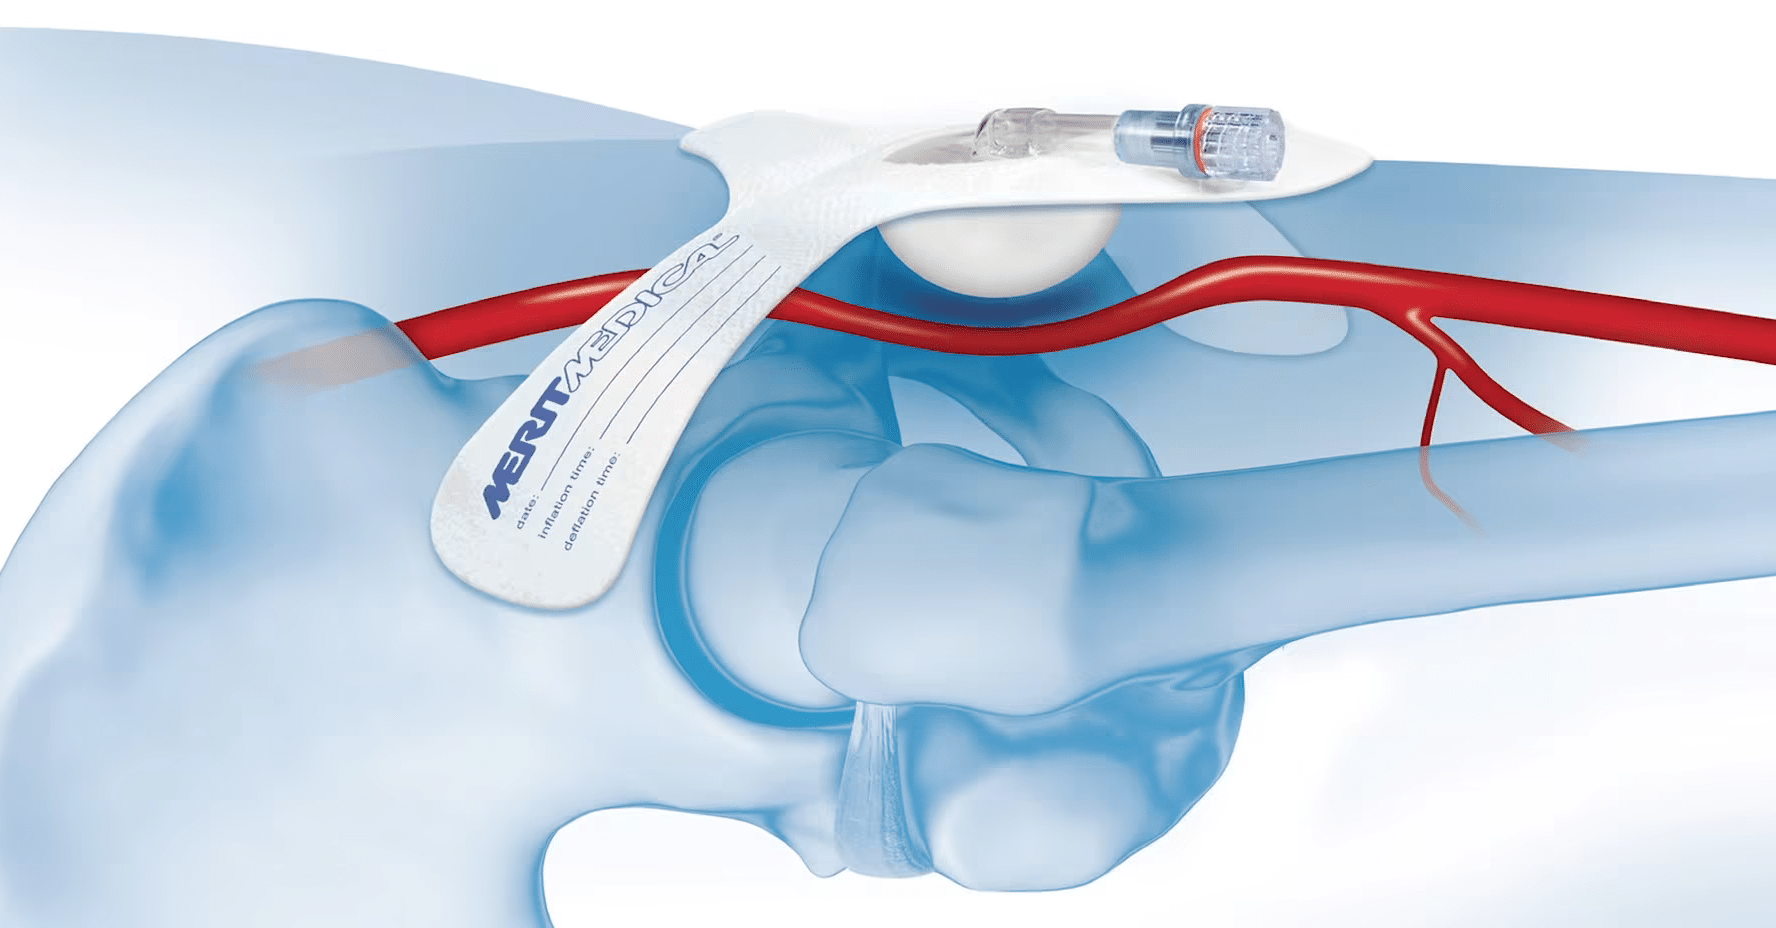 Side view of SafeGuard compression device with view of vein